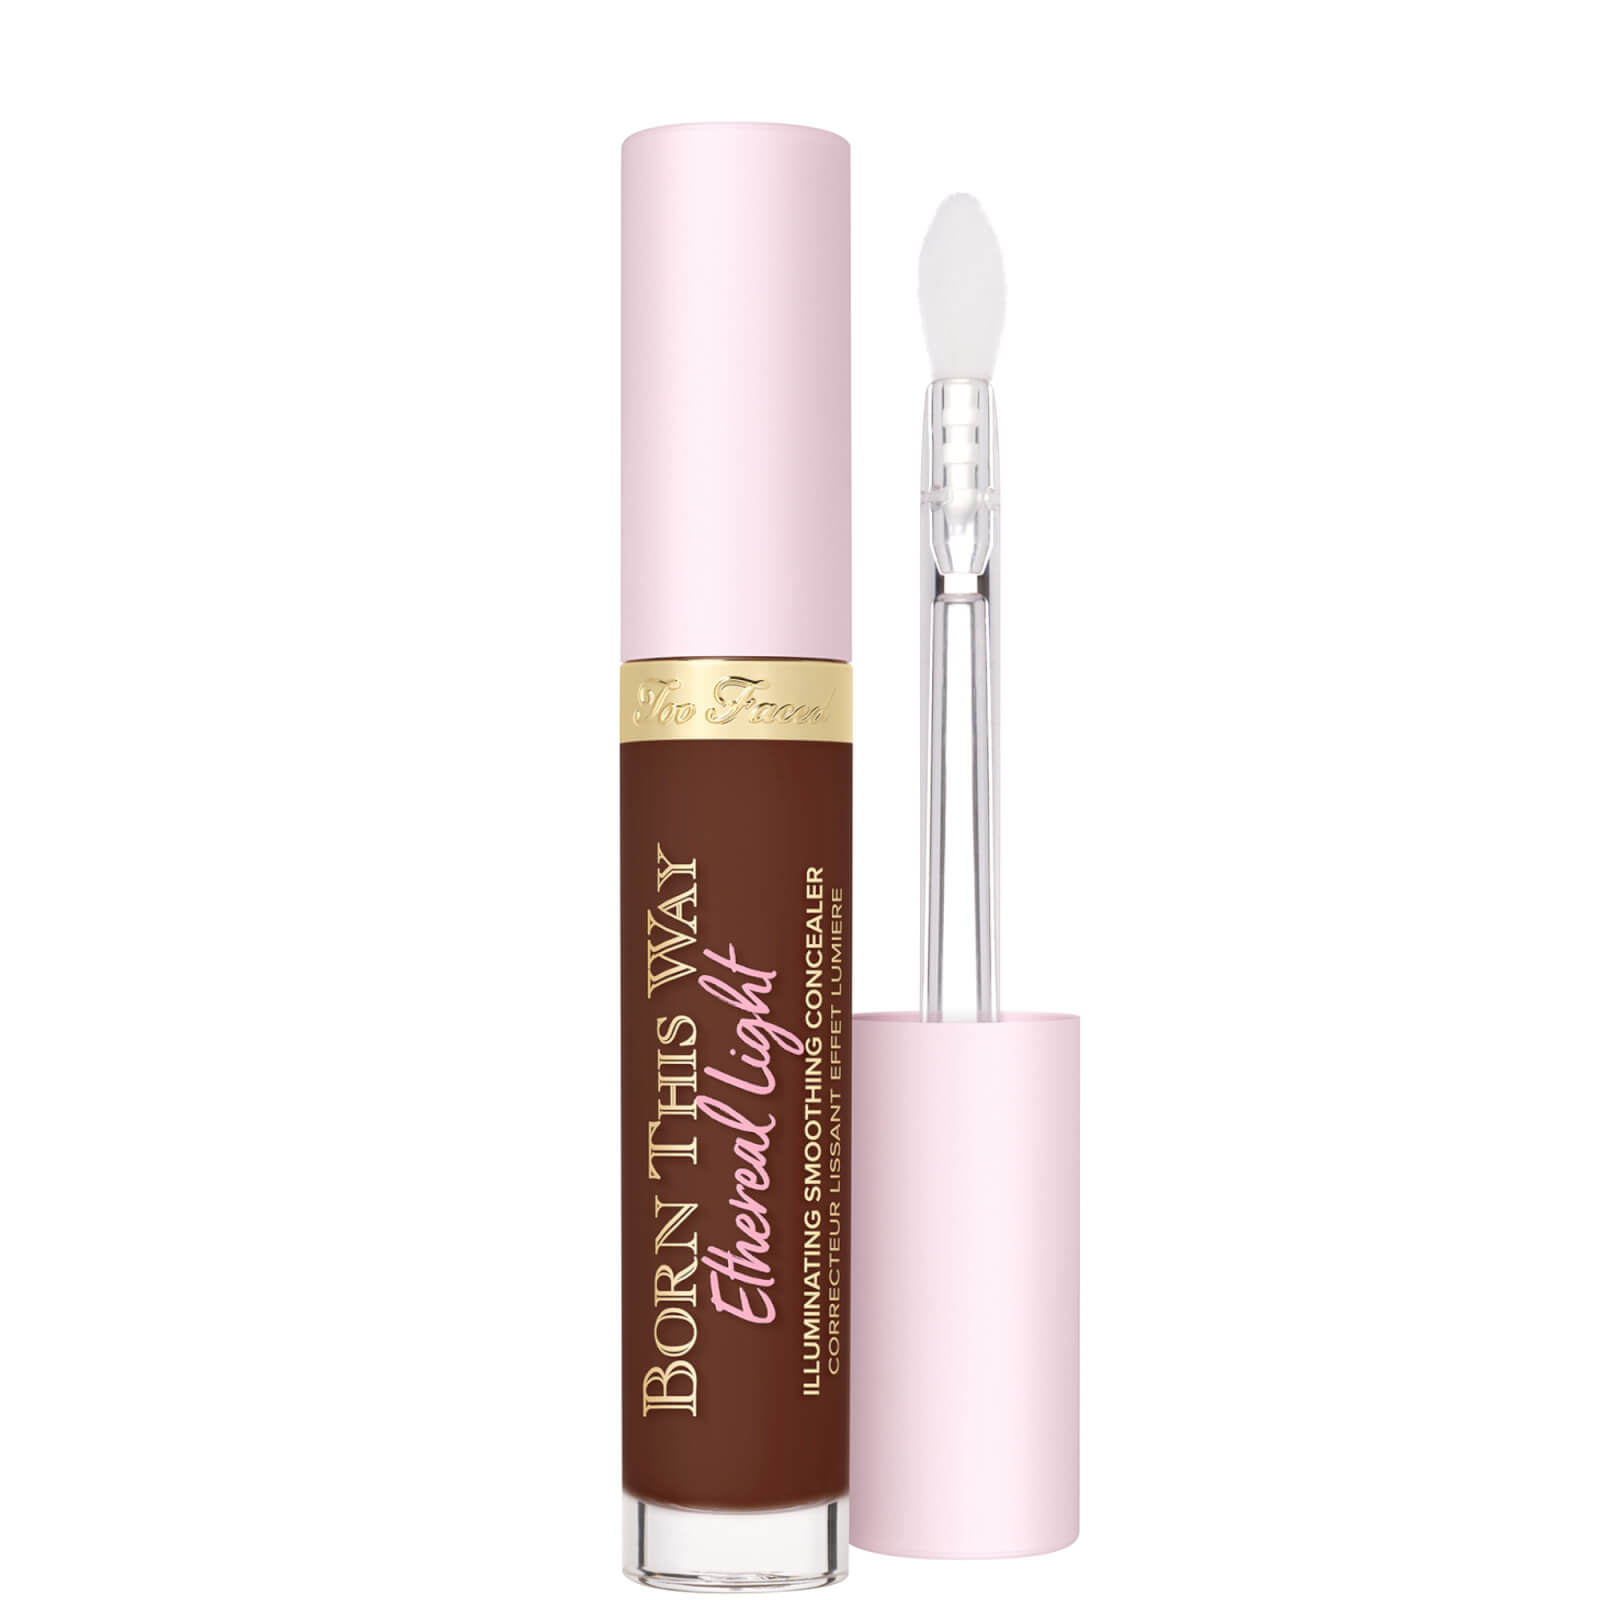 Too Faced Born This Way Ethereal Light Illuminating Smoothing Concealer 15ml (Various Shades) - Espr